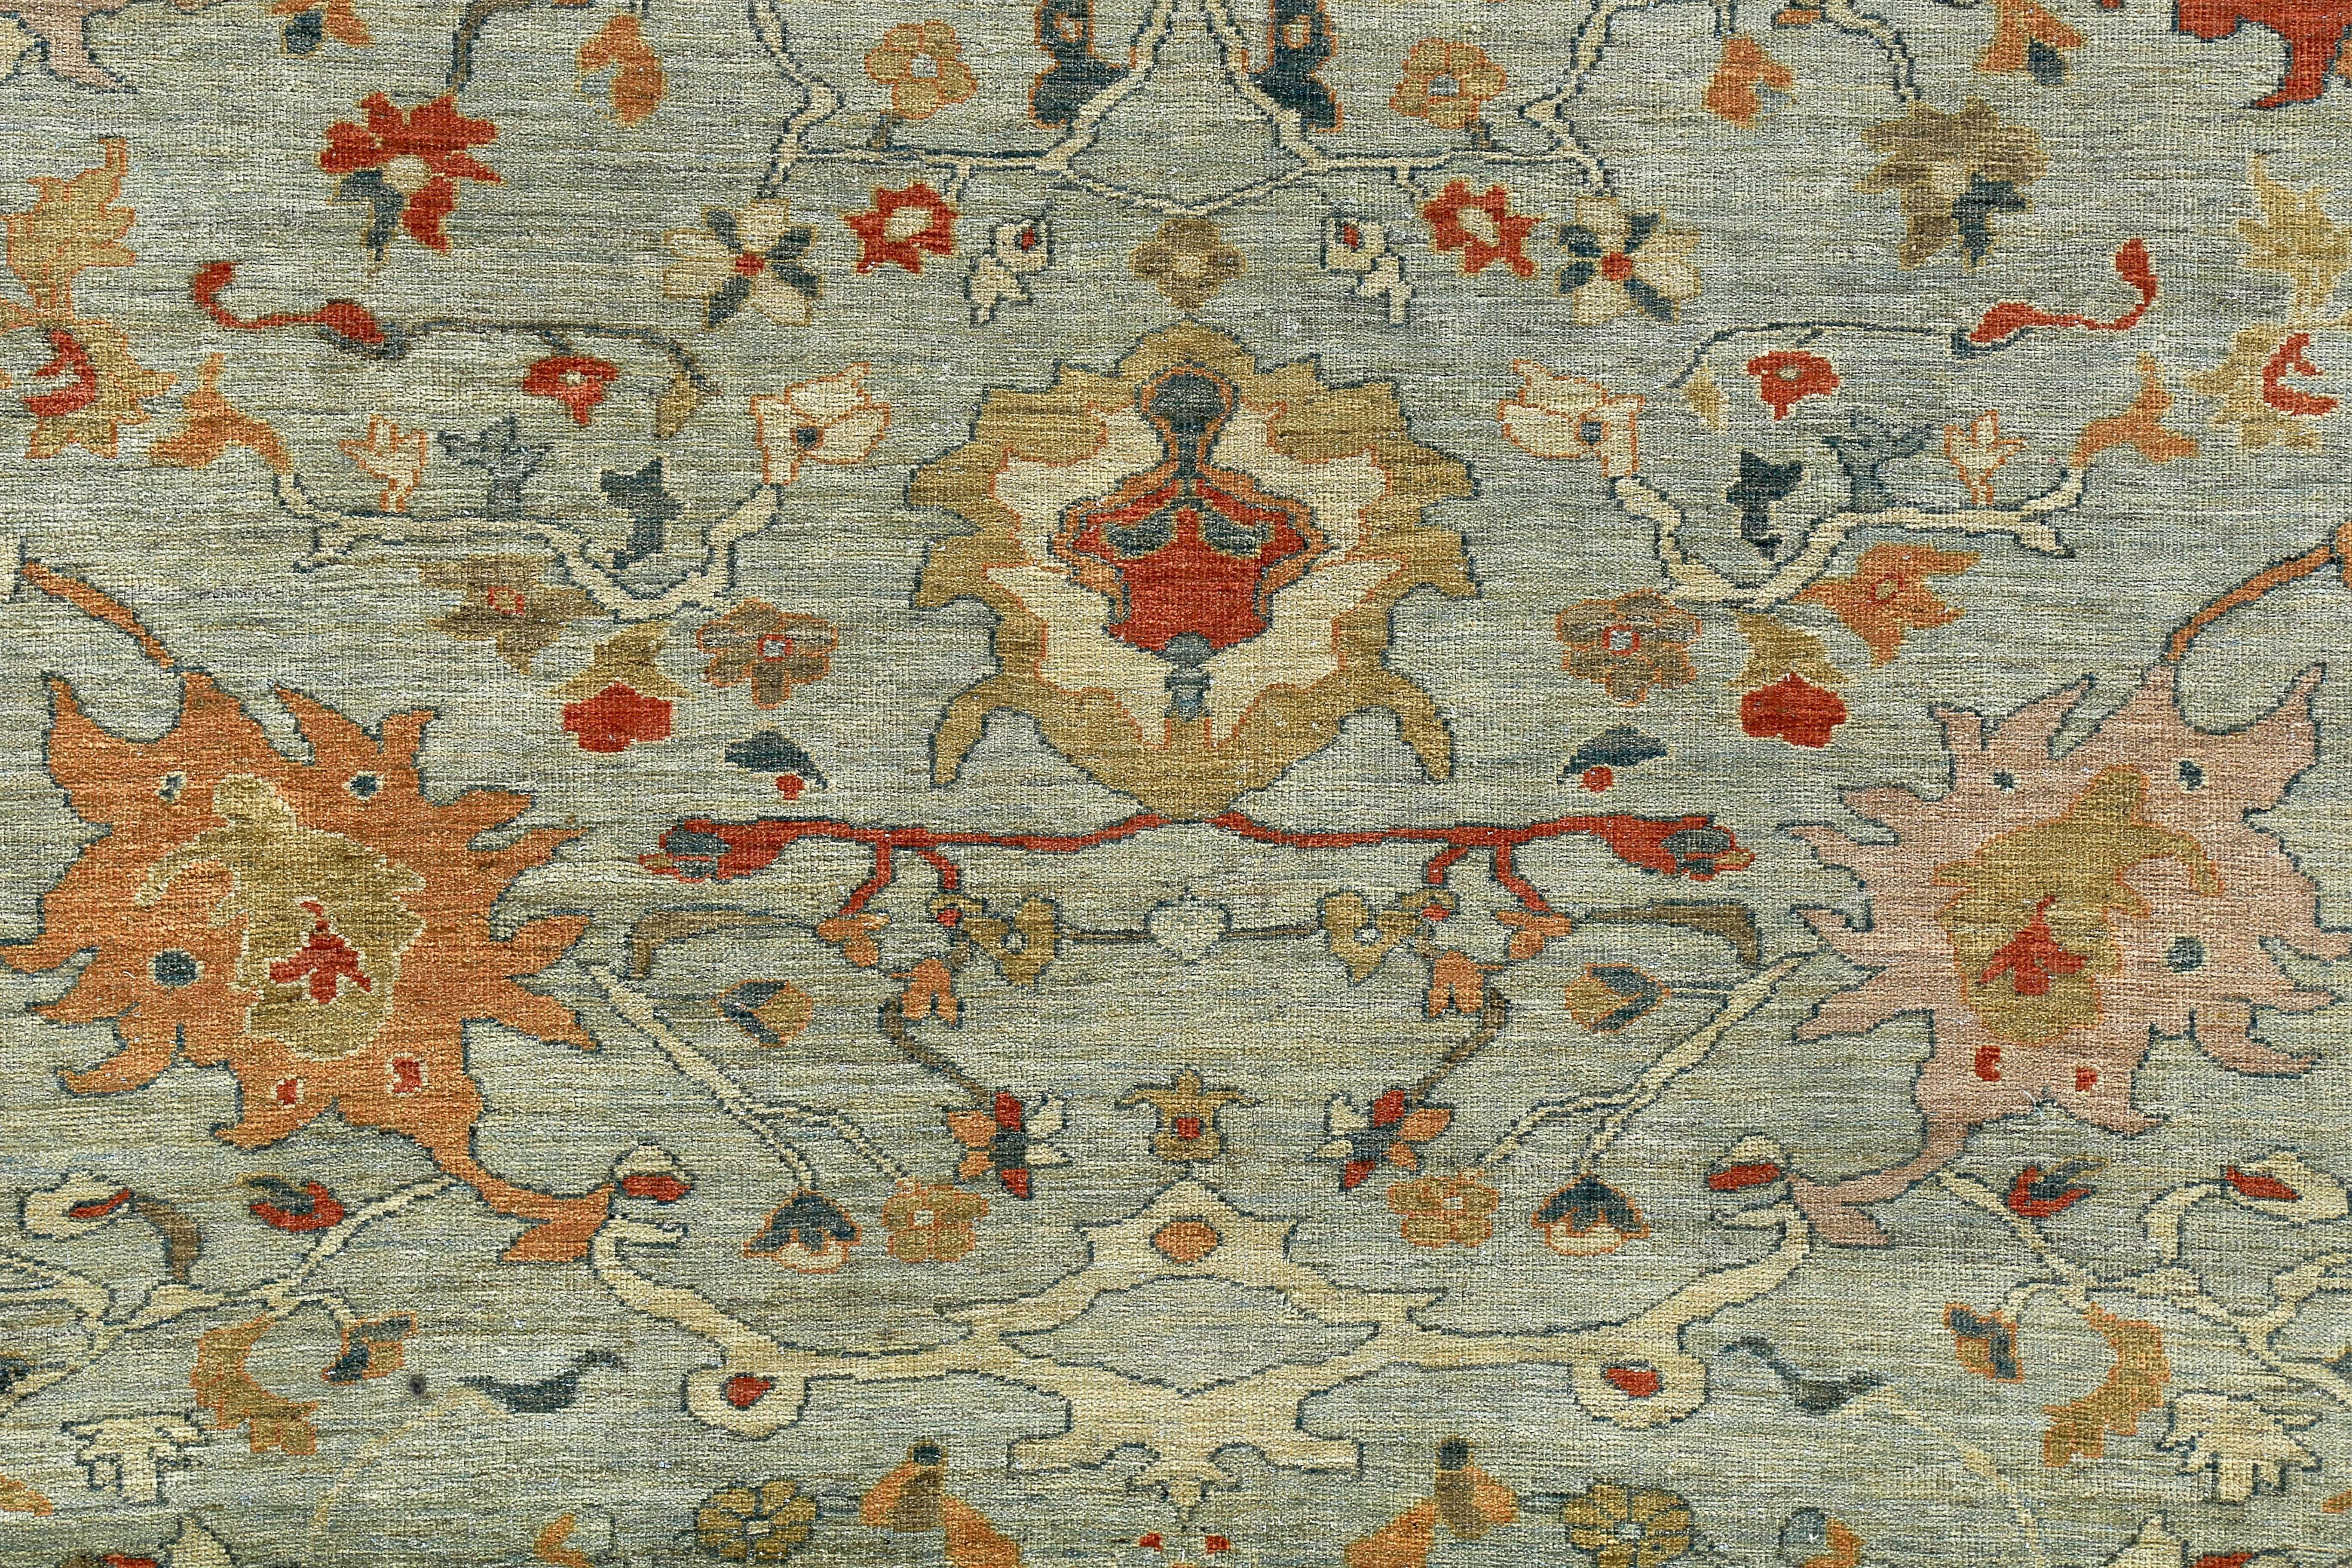 Hand-Woven Turkish Rug Sultanabad Style with Rust, Orange and Blue Botanical Details For Sale